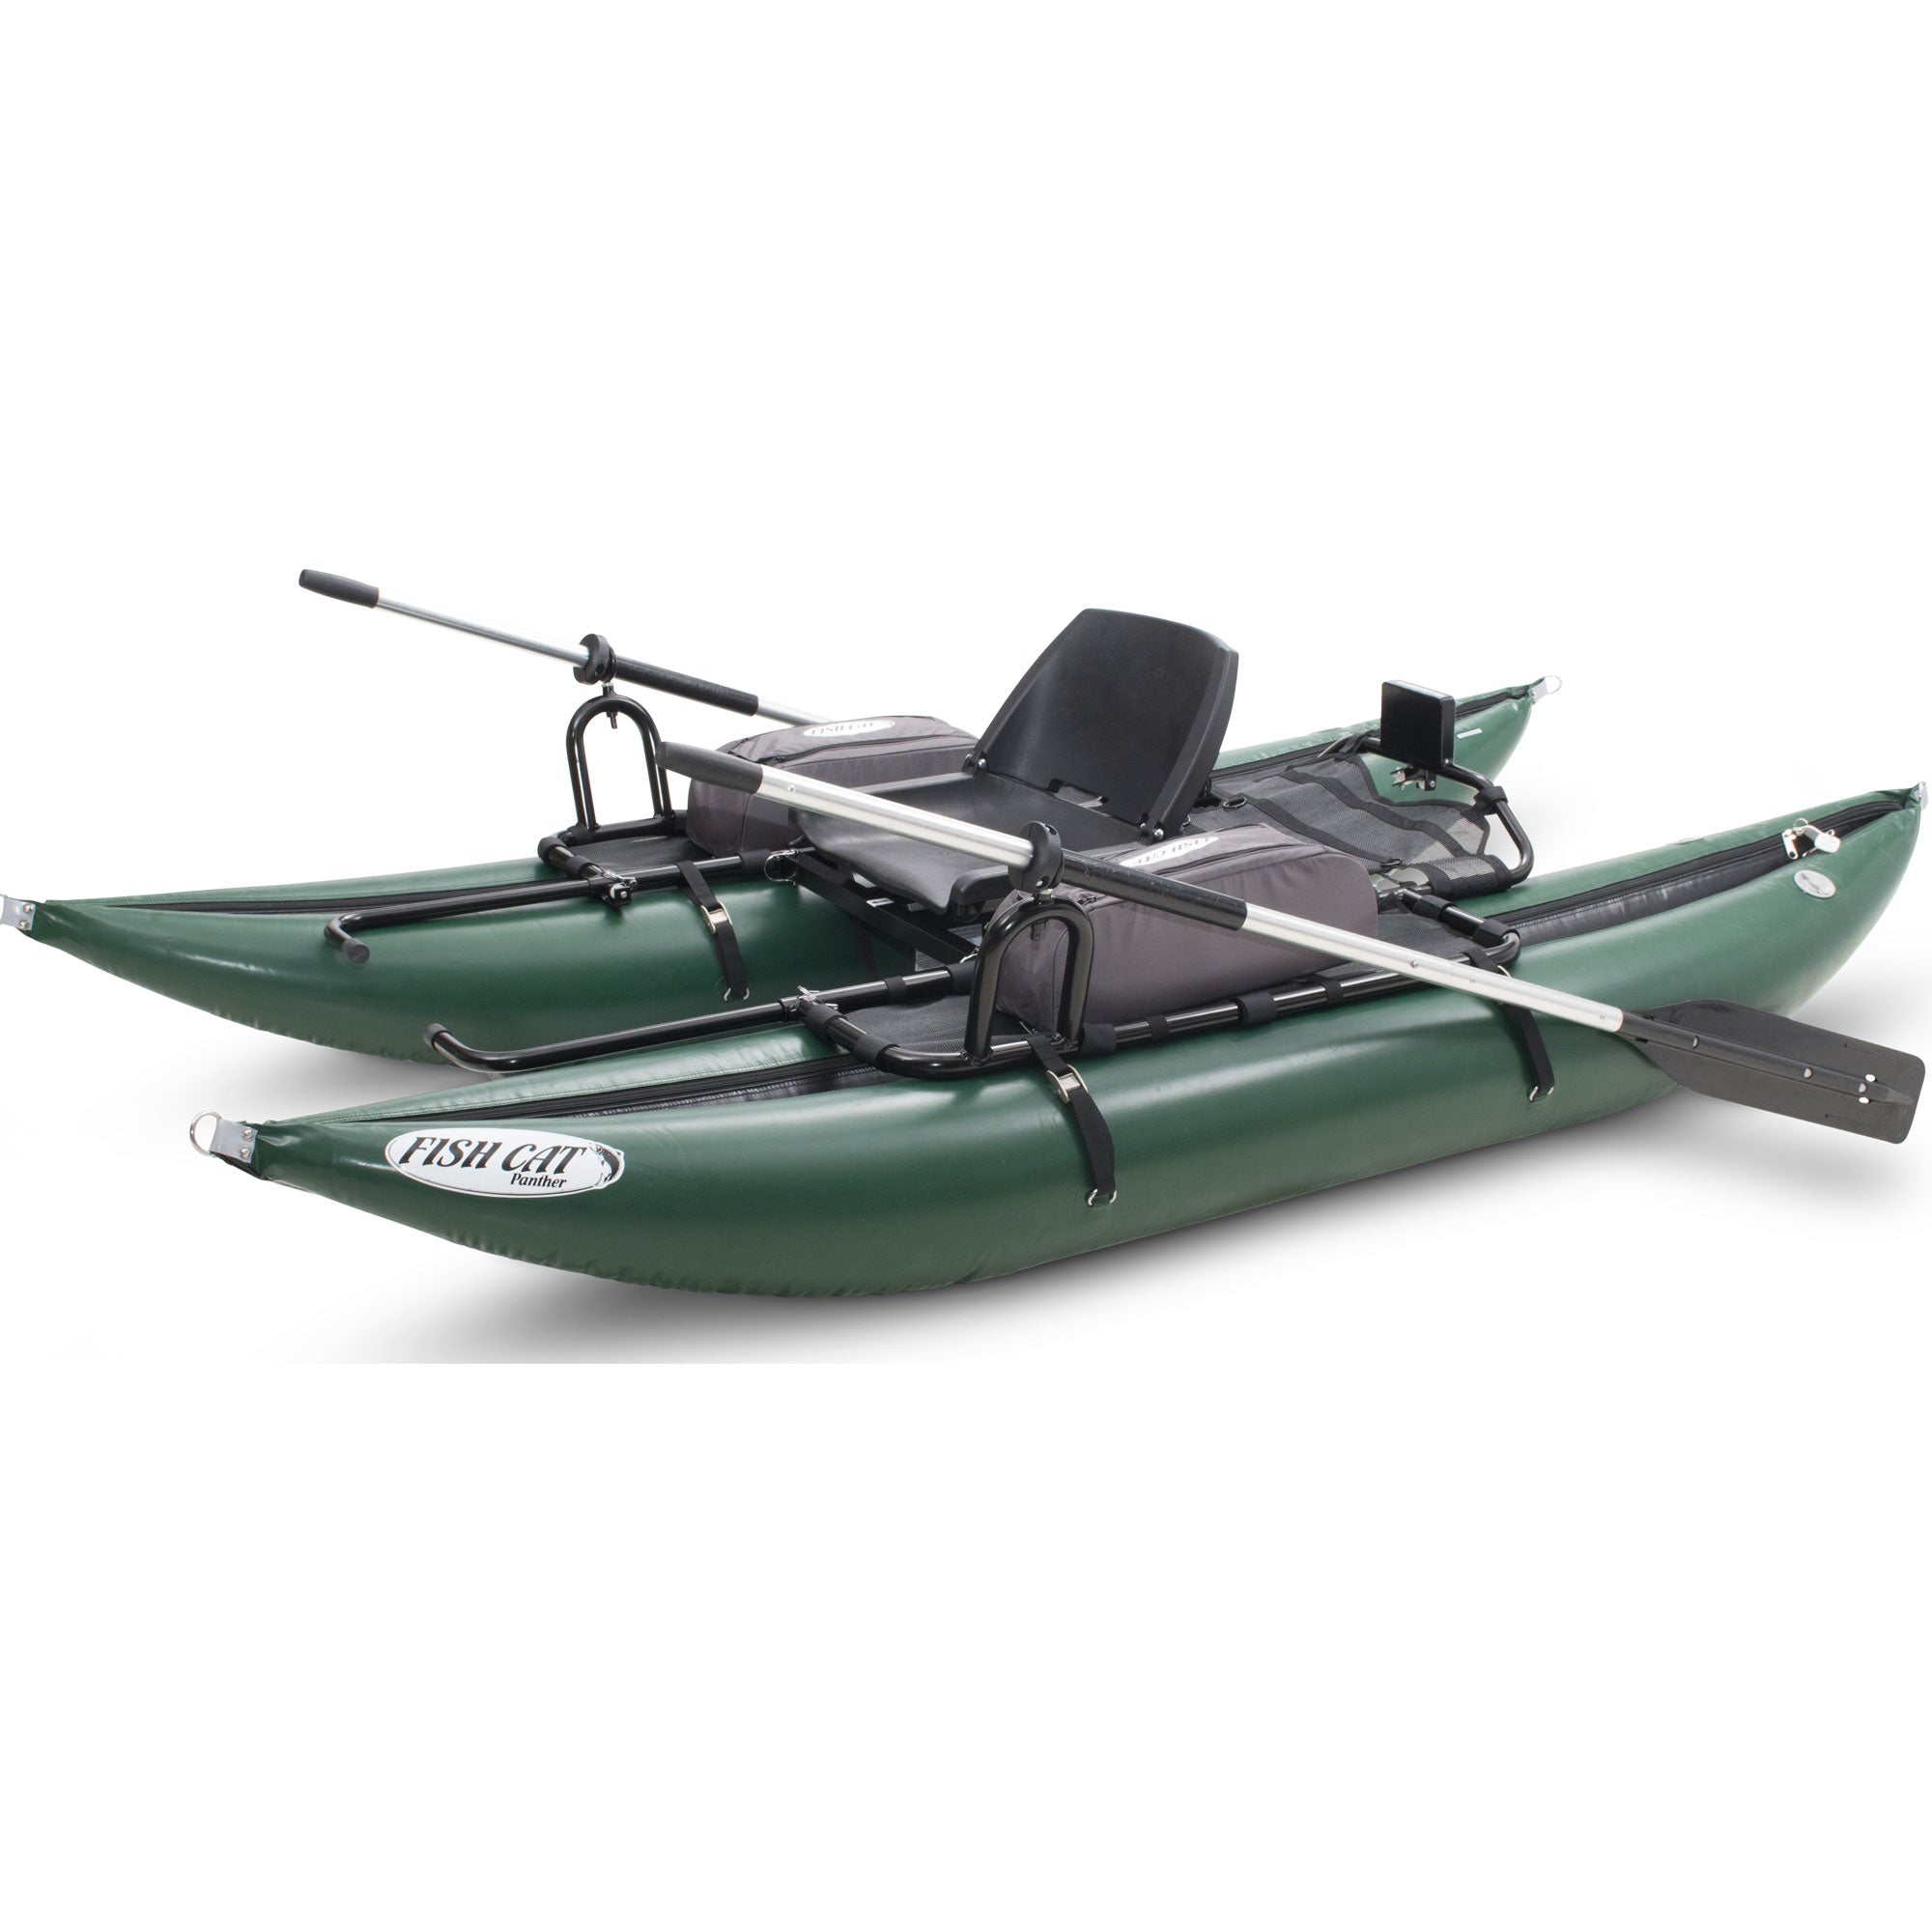 Outcast Fish Cat Panther Pontoon Boat – Outdoorplay